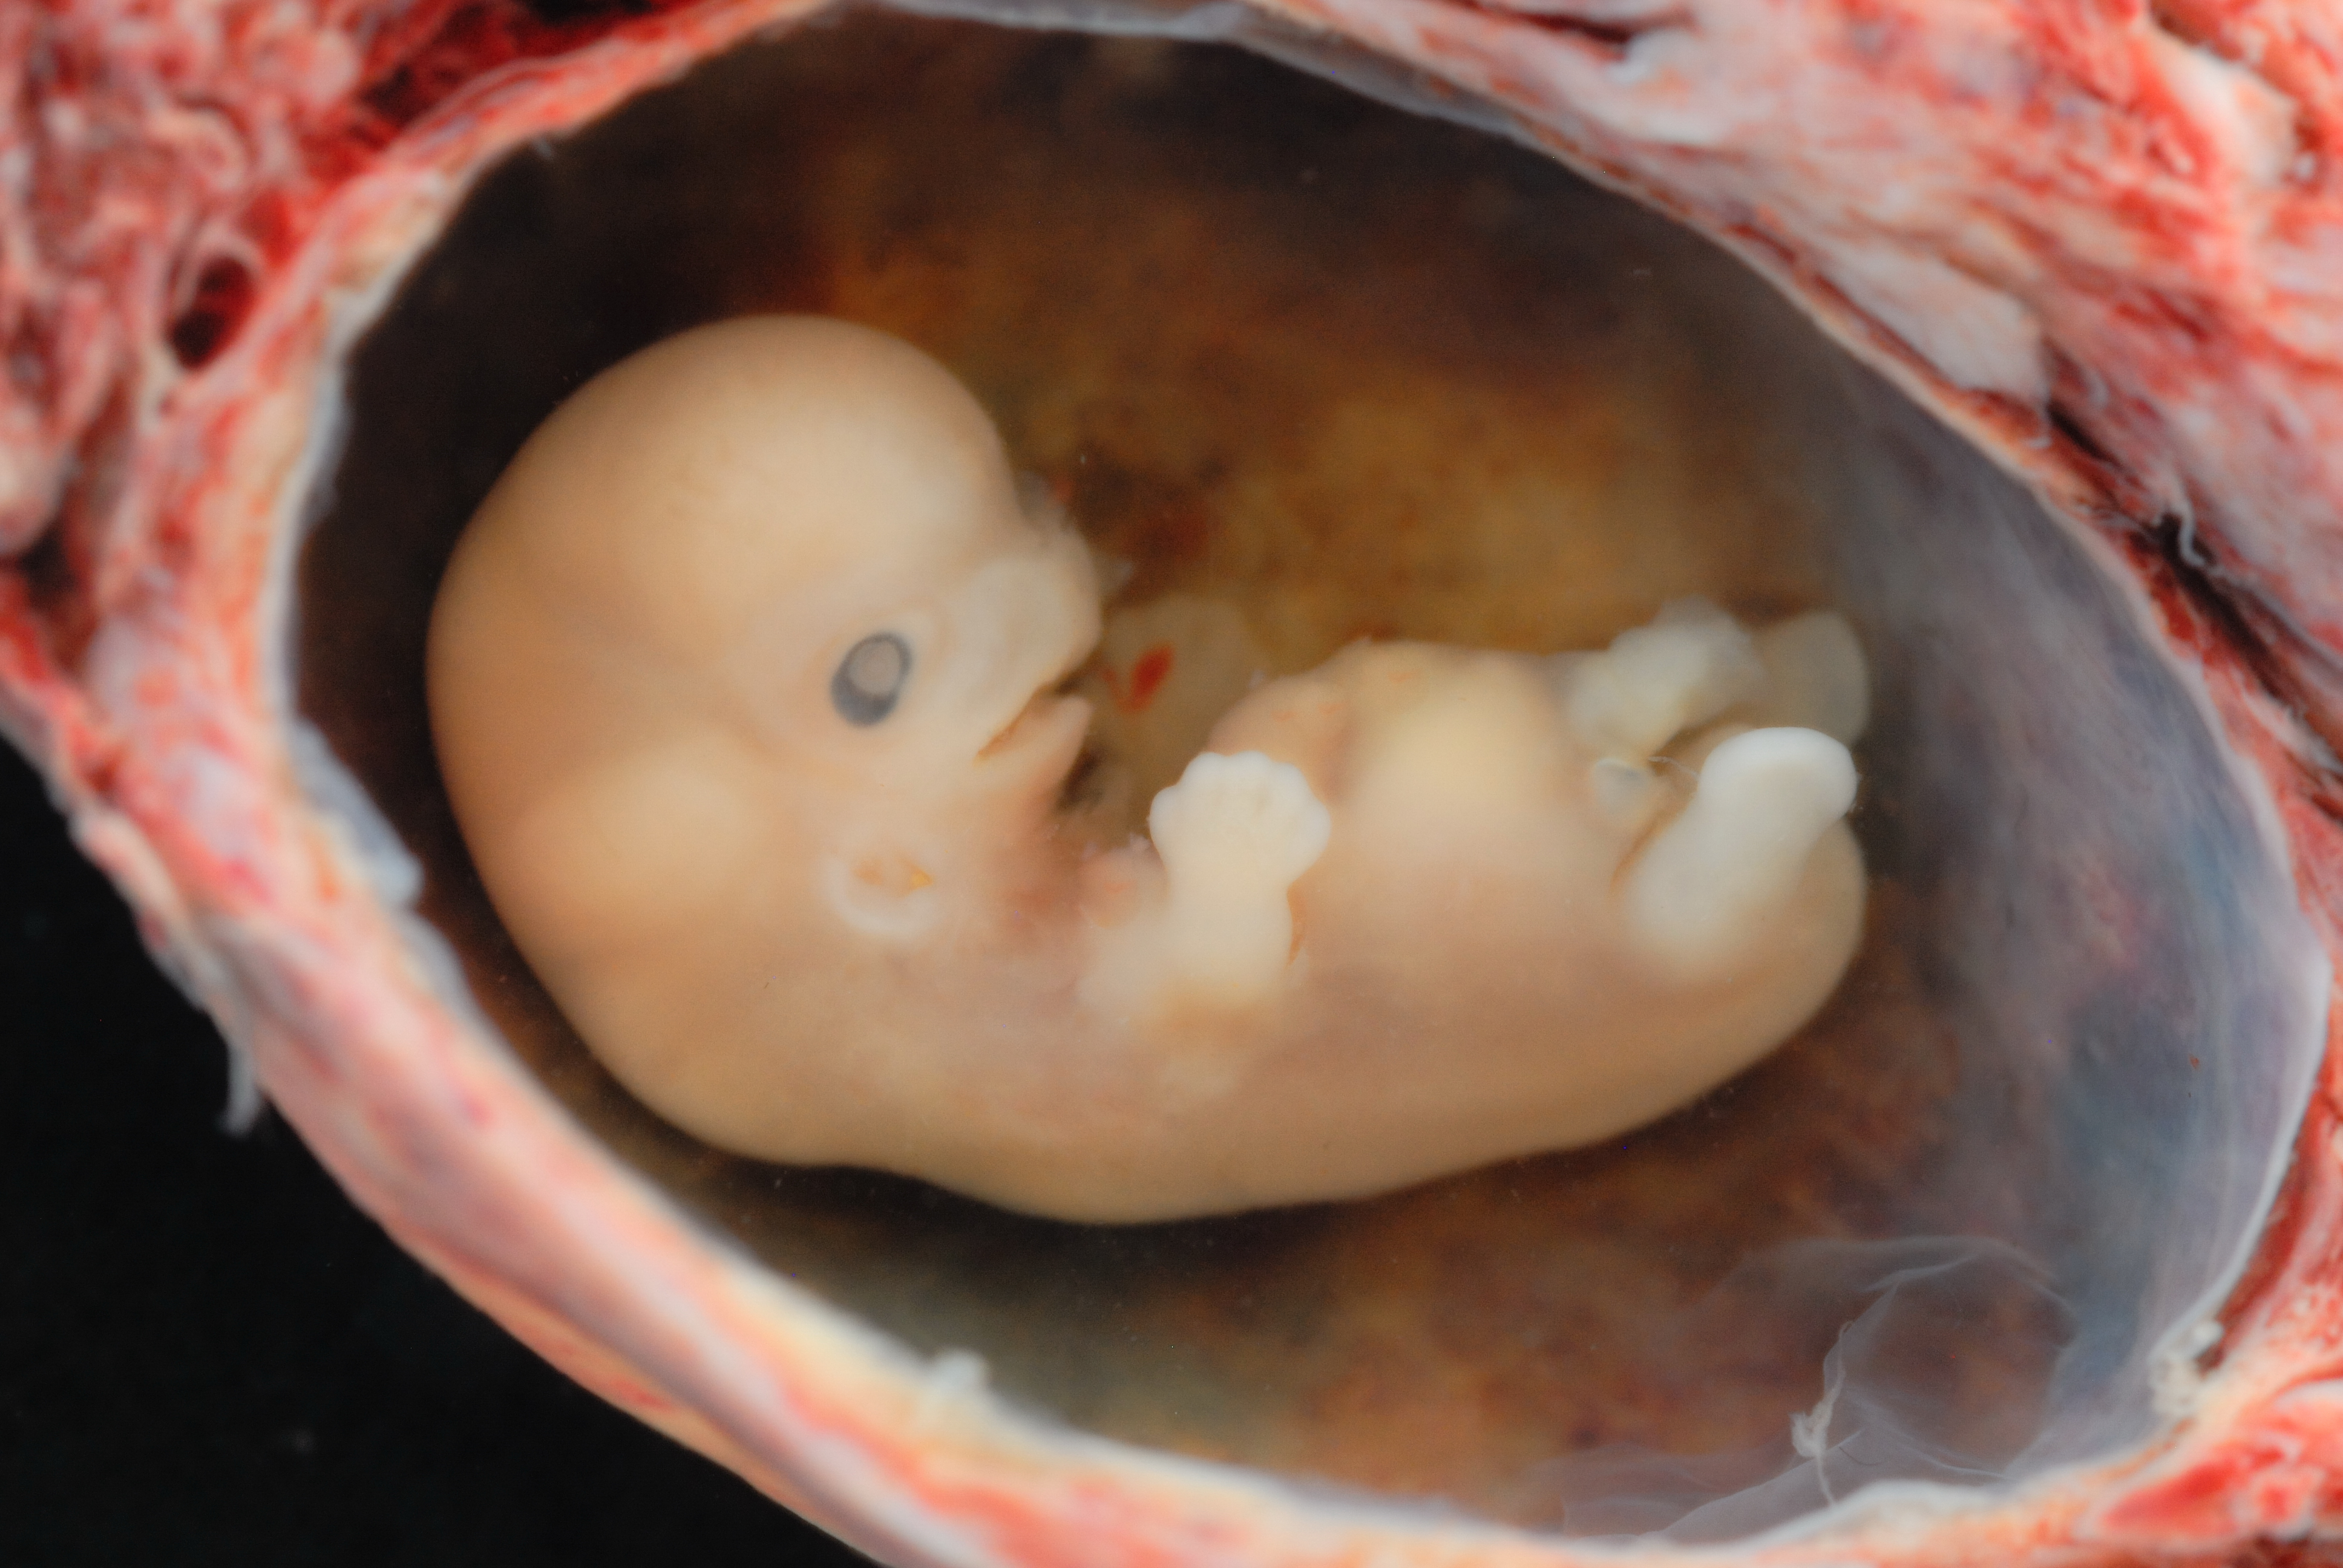 miscarried embryo at 3 weeks